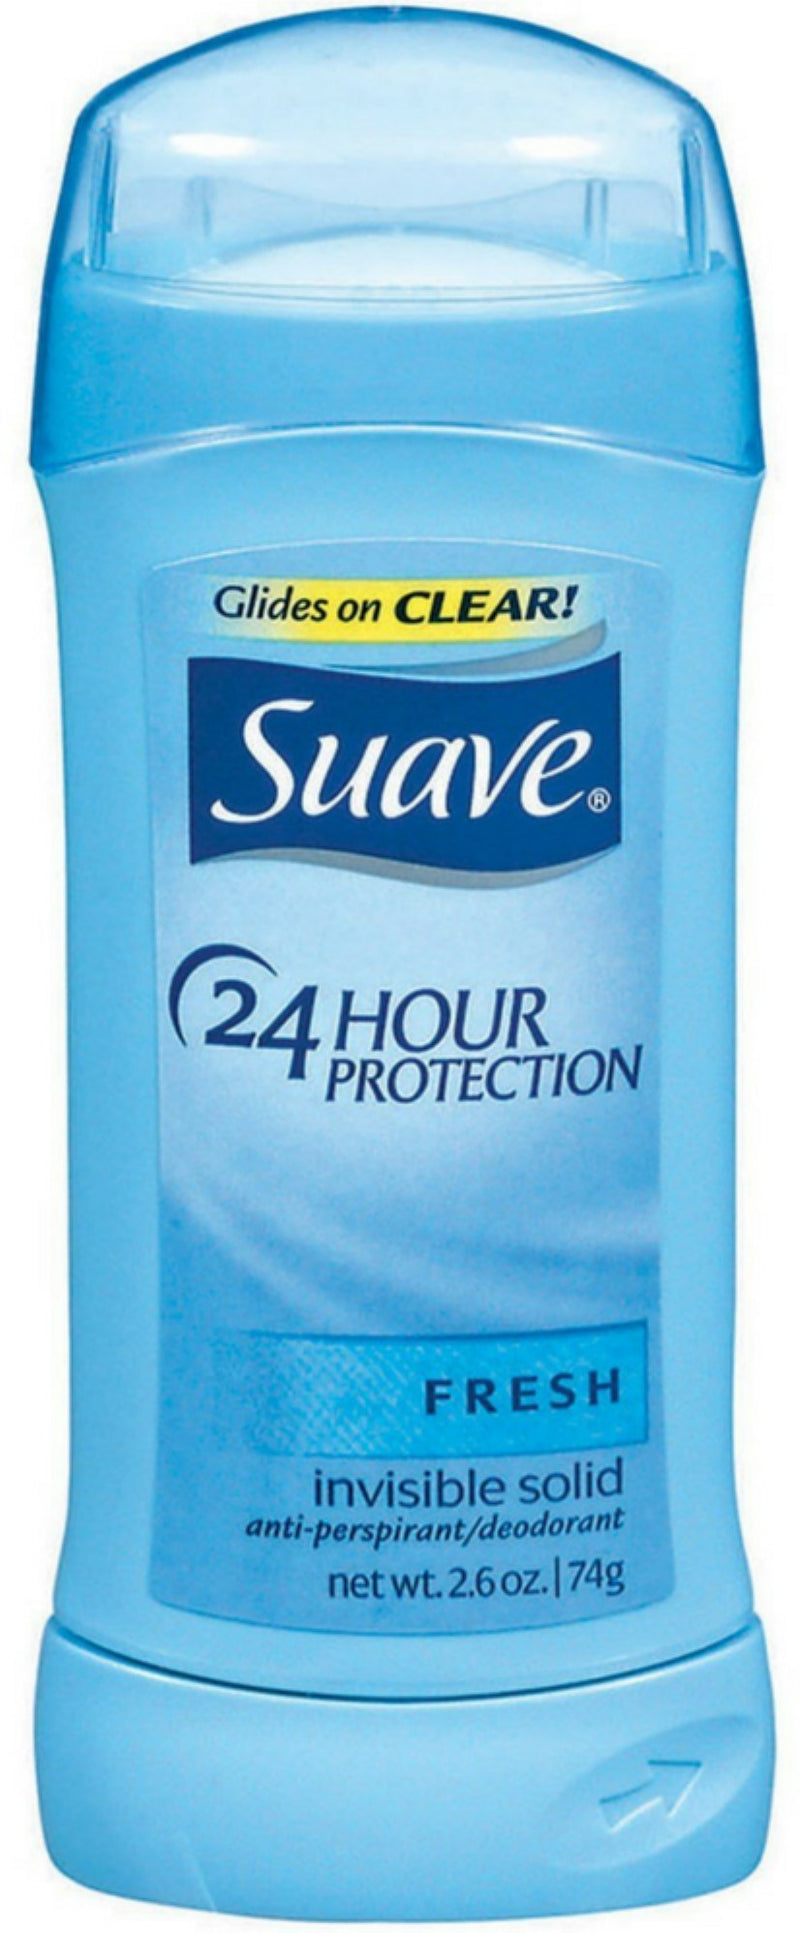 Suave 24 Hour Protection Anti-Perspirant Deodorant Invisible Solid, Fresh 2.60 oz